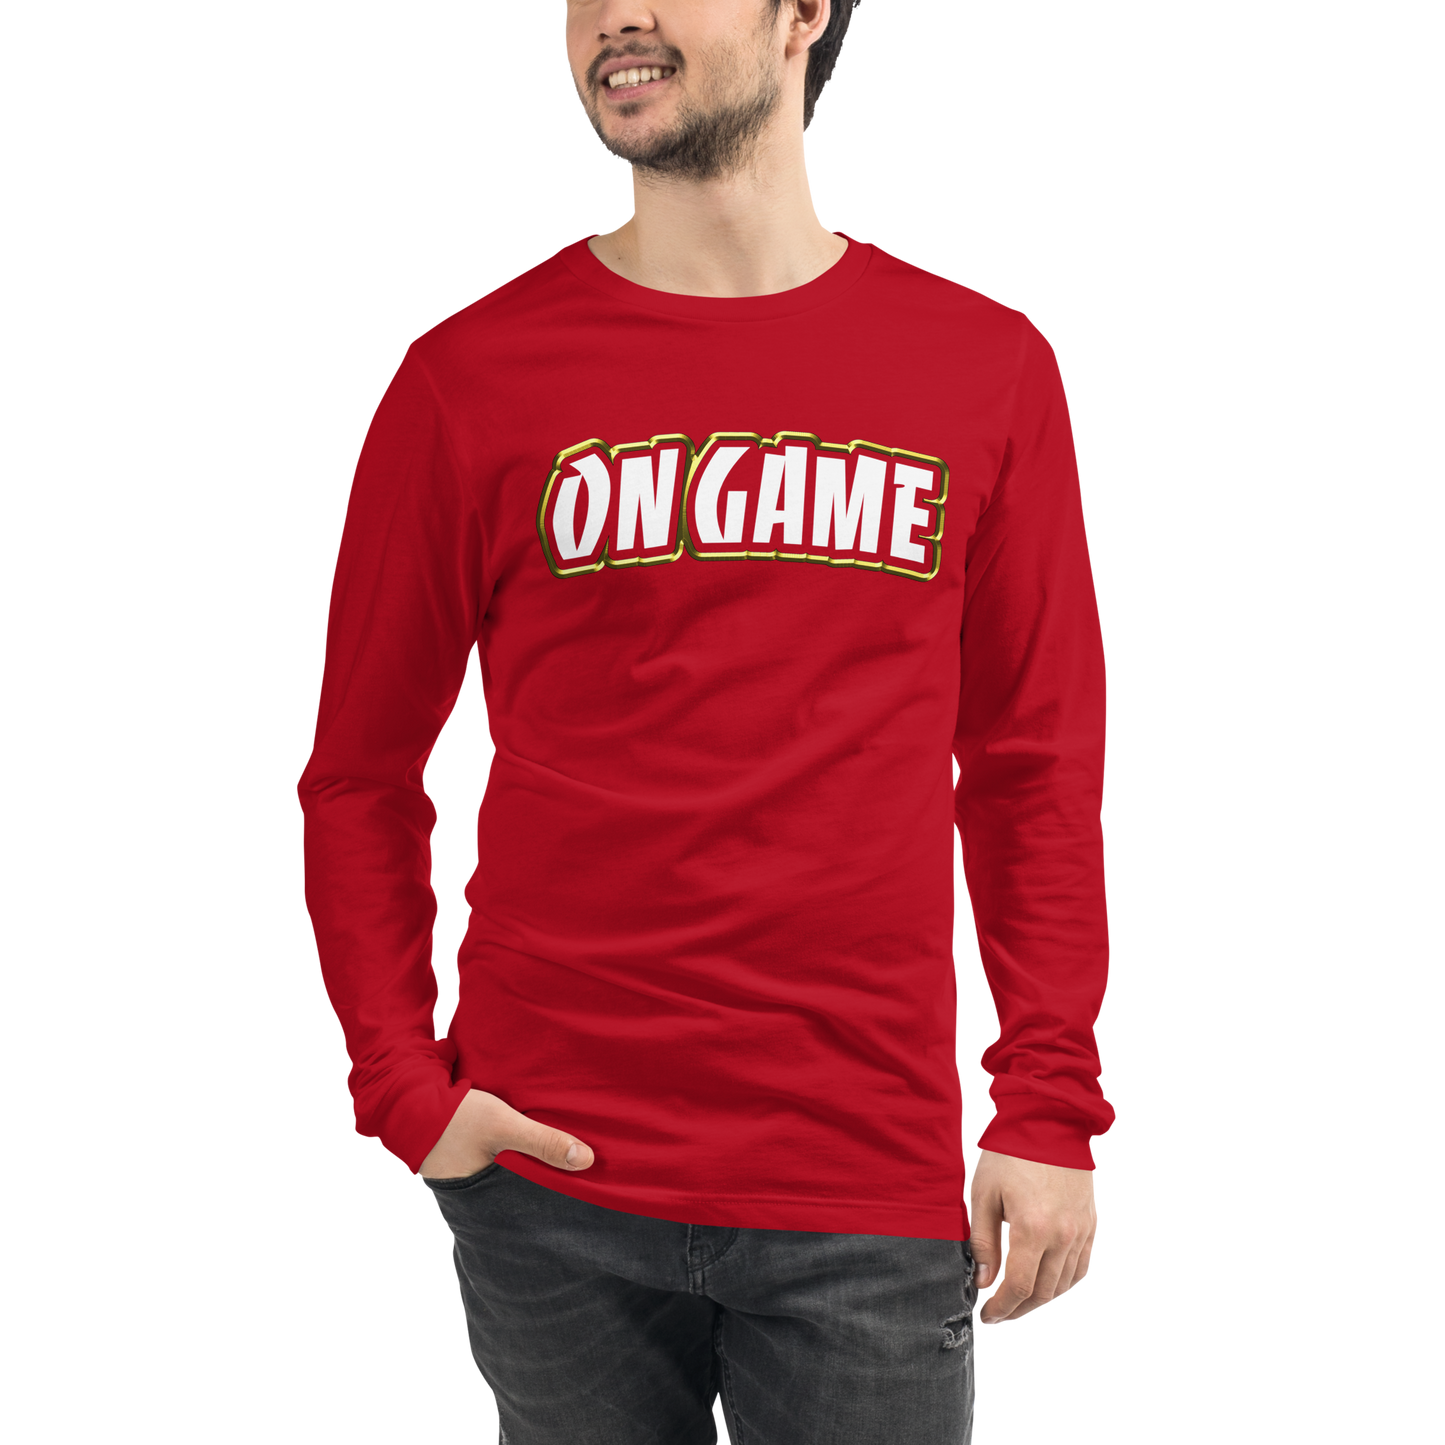 On Game - Long Sleeve - 100% Cotton